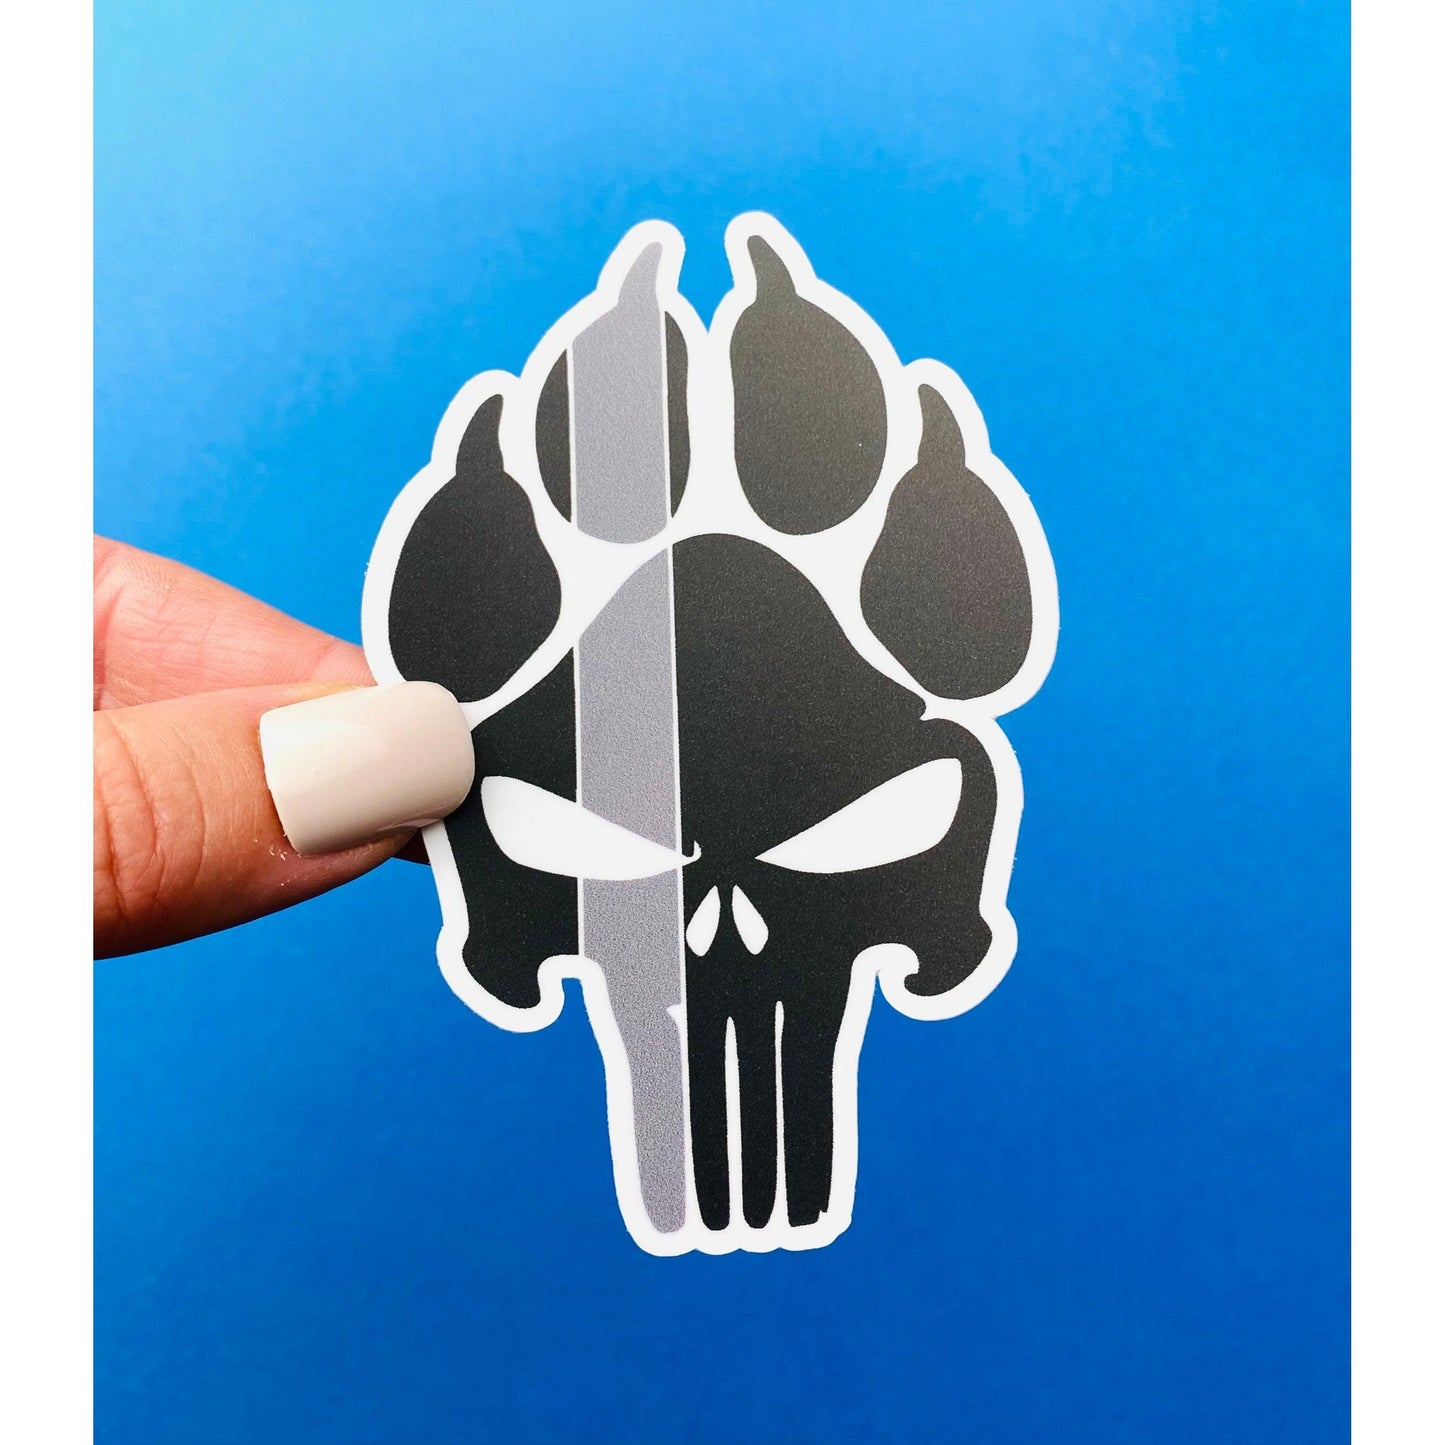 Corrections Officer K9 Police Punisher Pawprint Sticker, Sticker for Police K9 Handler, Dept of Corrections, Law Enforcement - Ottos Grotto :: Stickers For Your Stuff